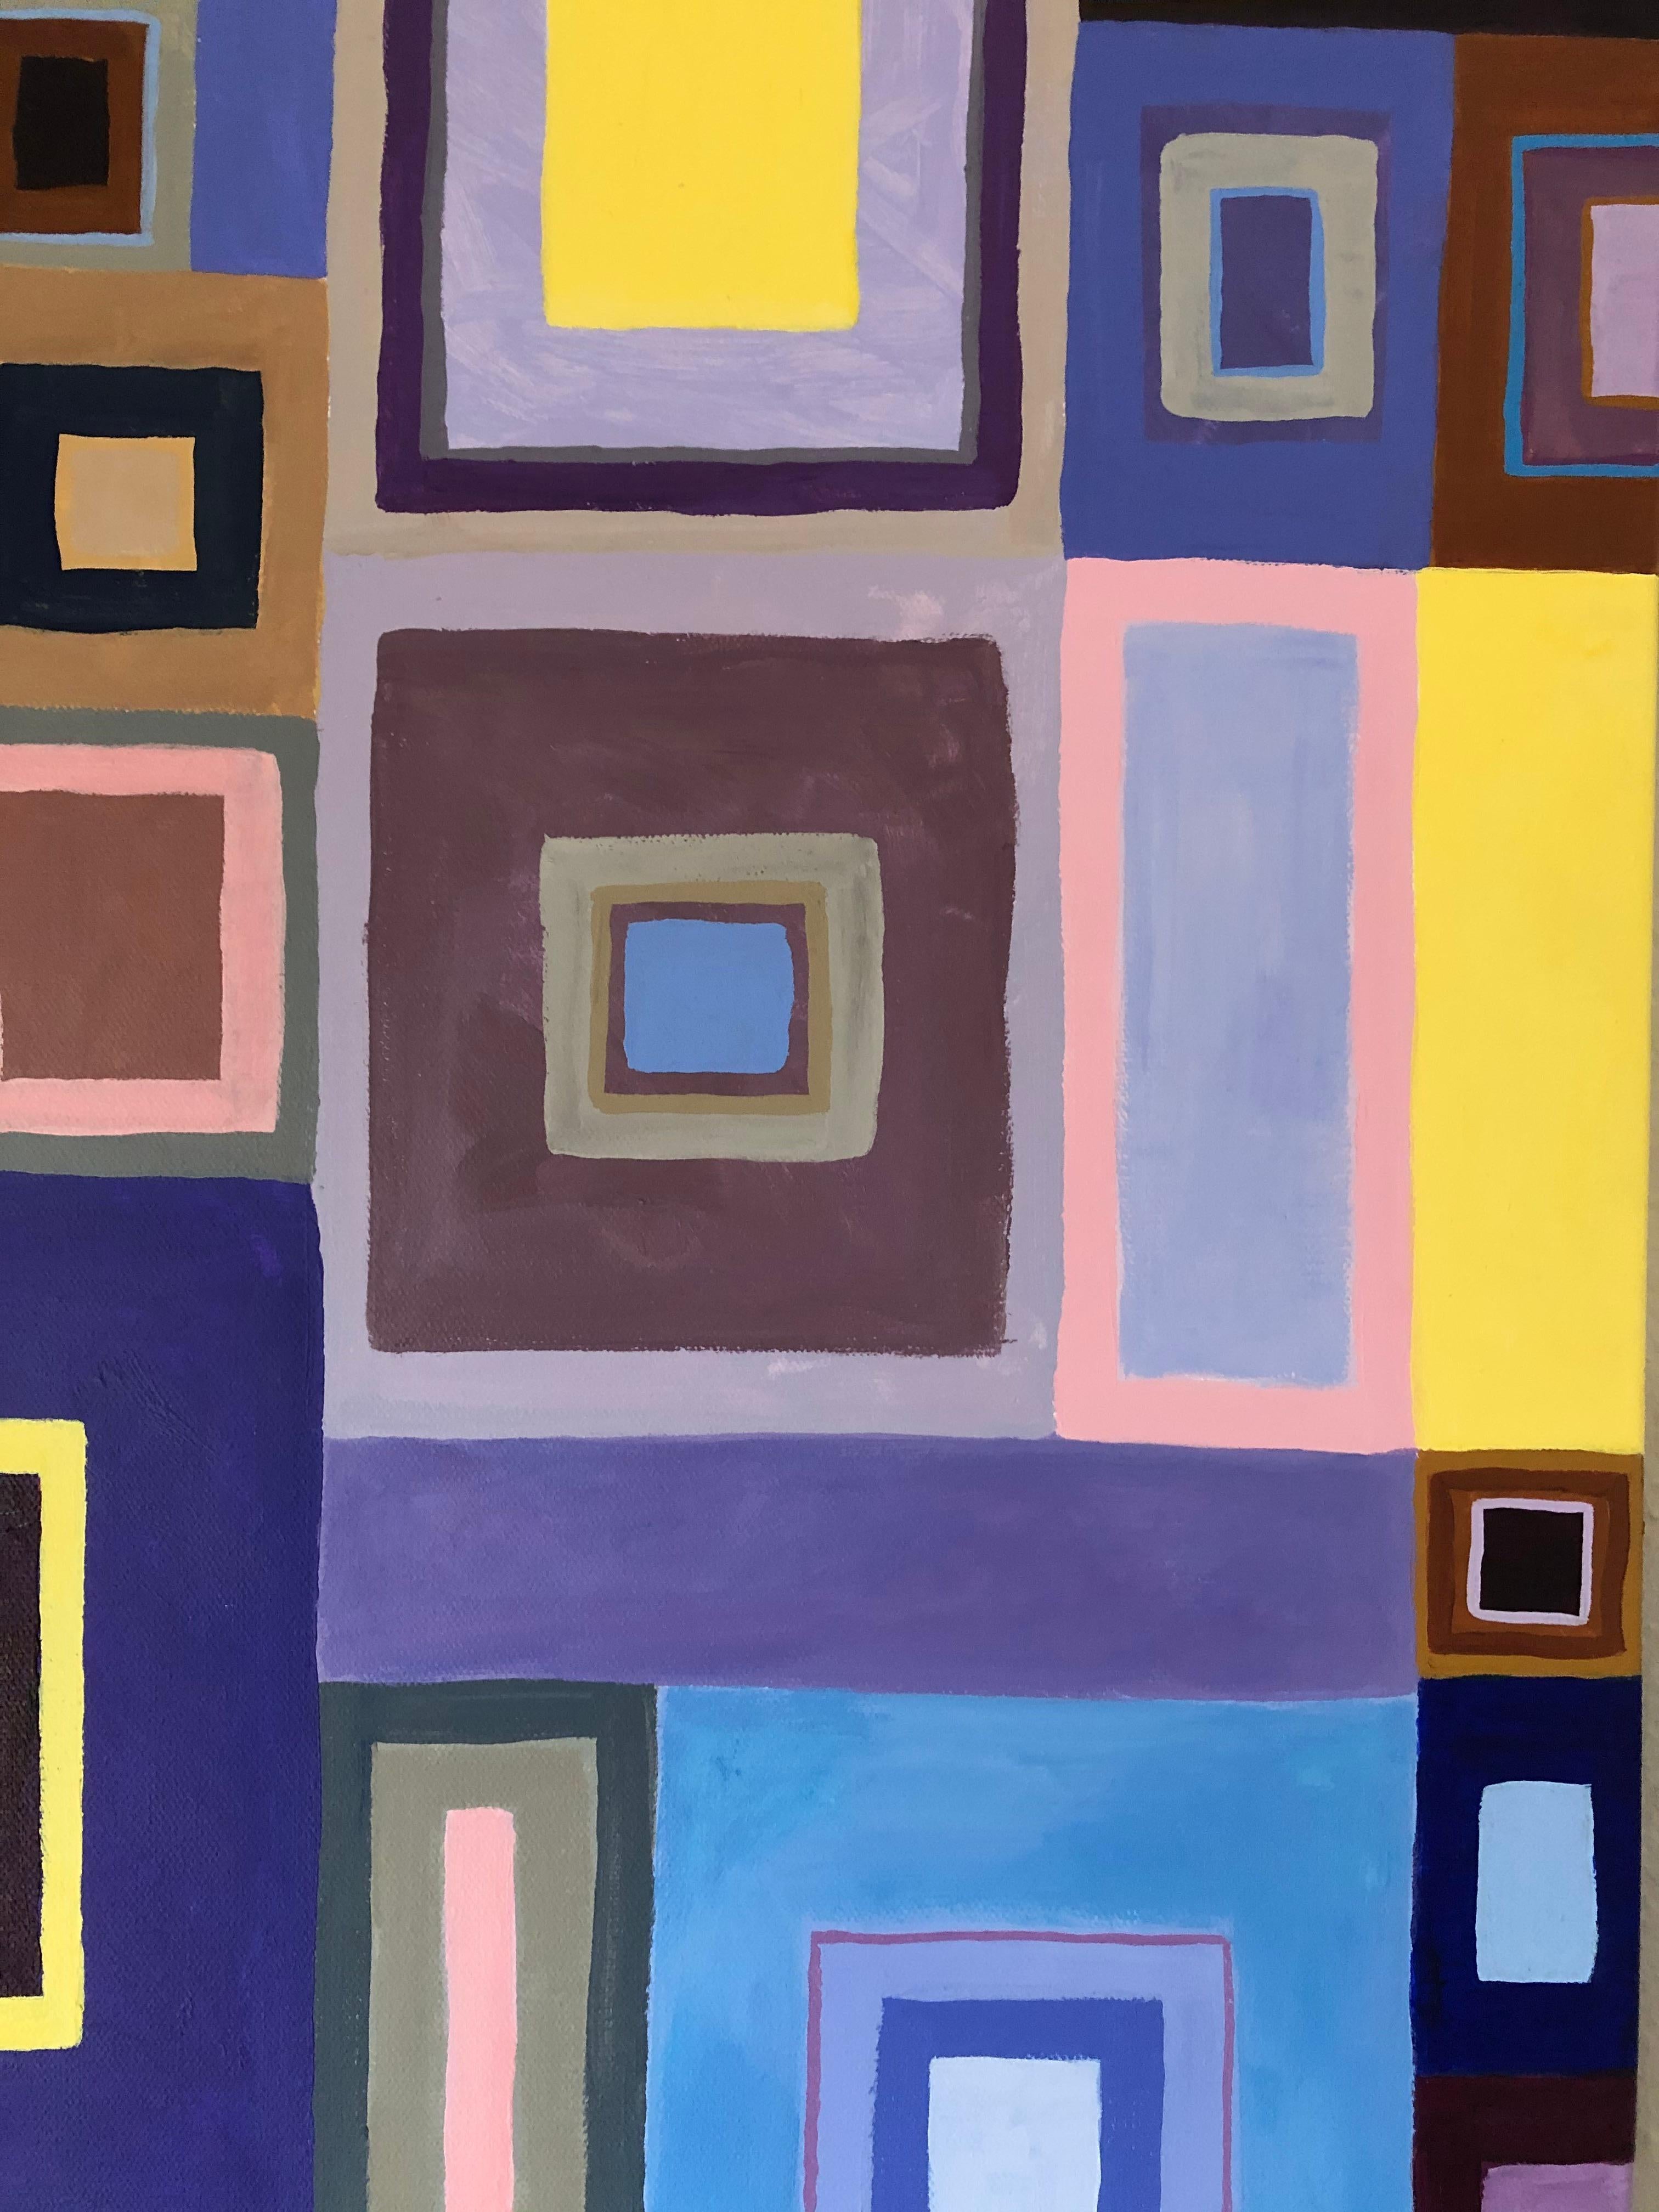 Striking large square abstract painting on canvas having marvelous lively geometric pattern in beautiful color palette including yellow, violet, brown, grey, purple blue and pink.